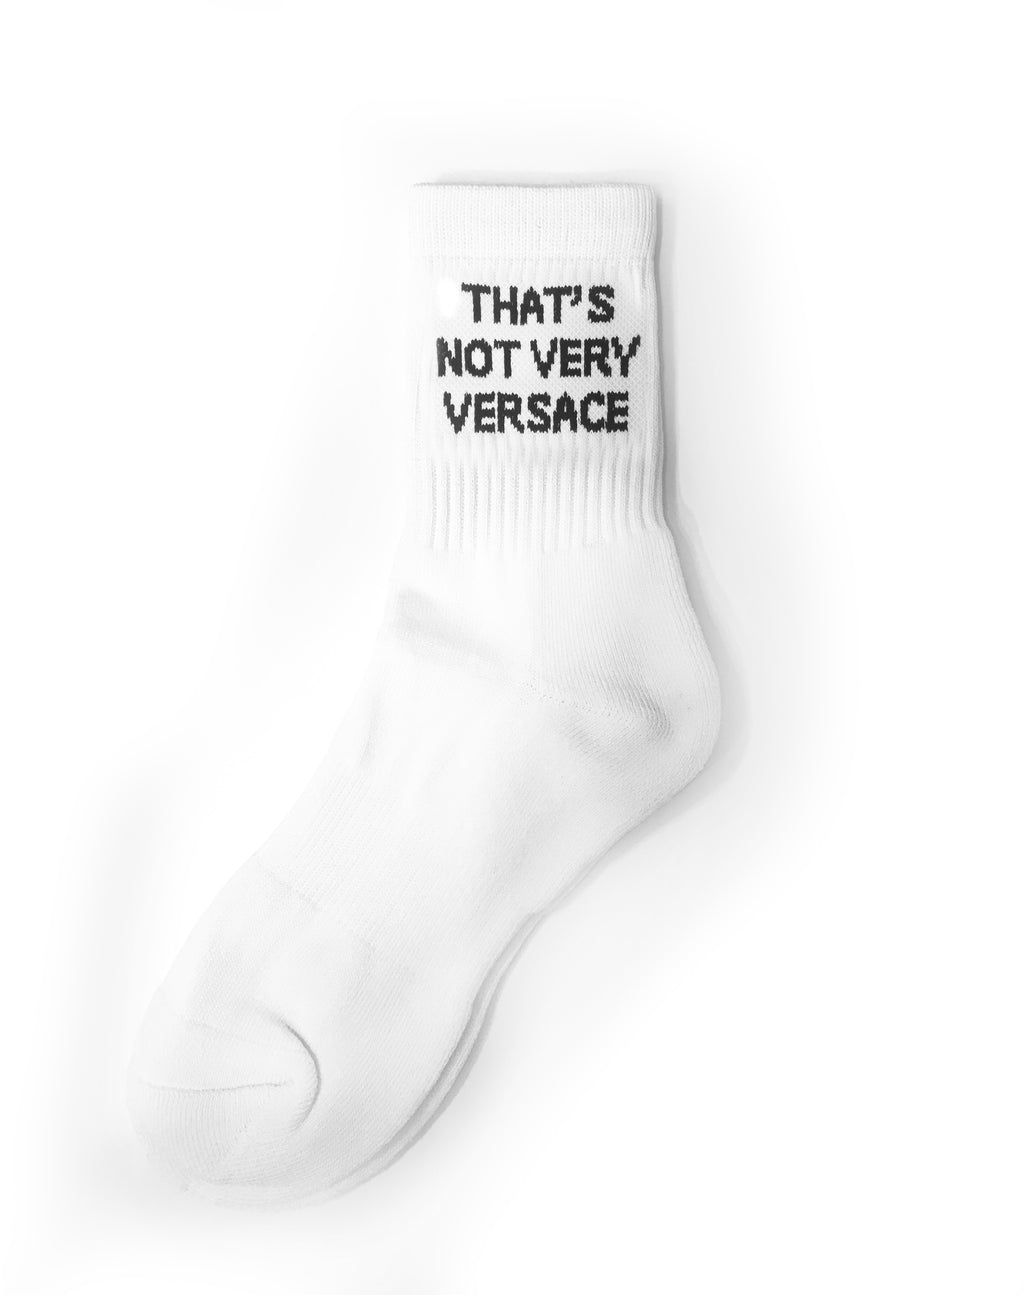 PAUSE 'That's Not Very Versace' Socks